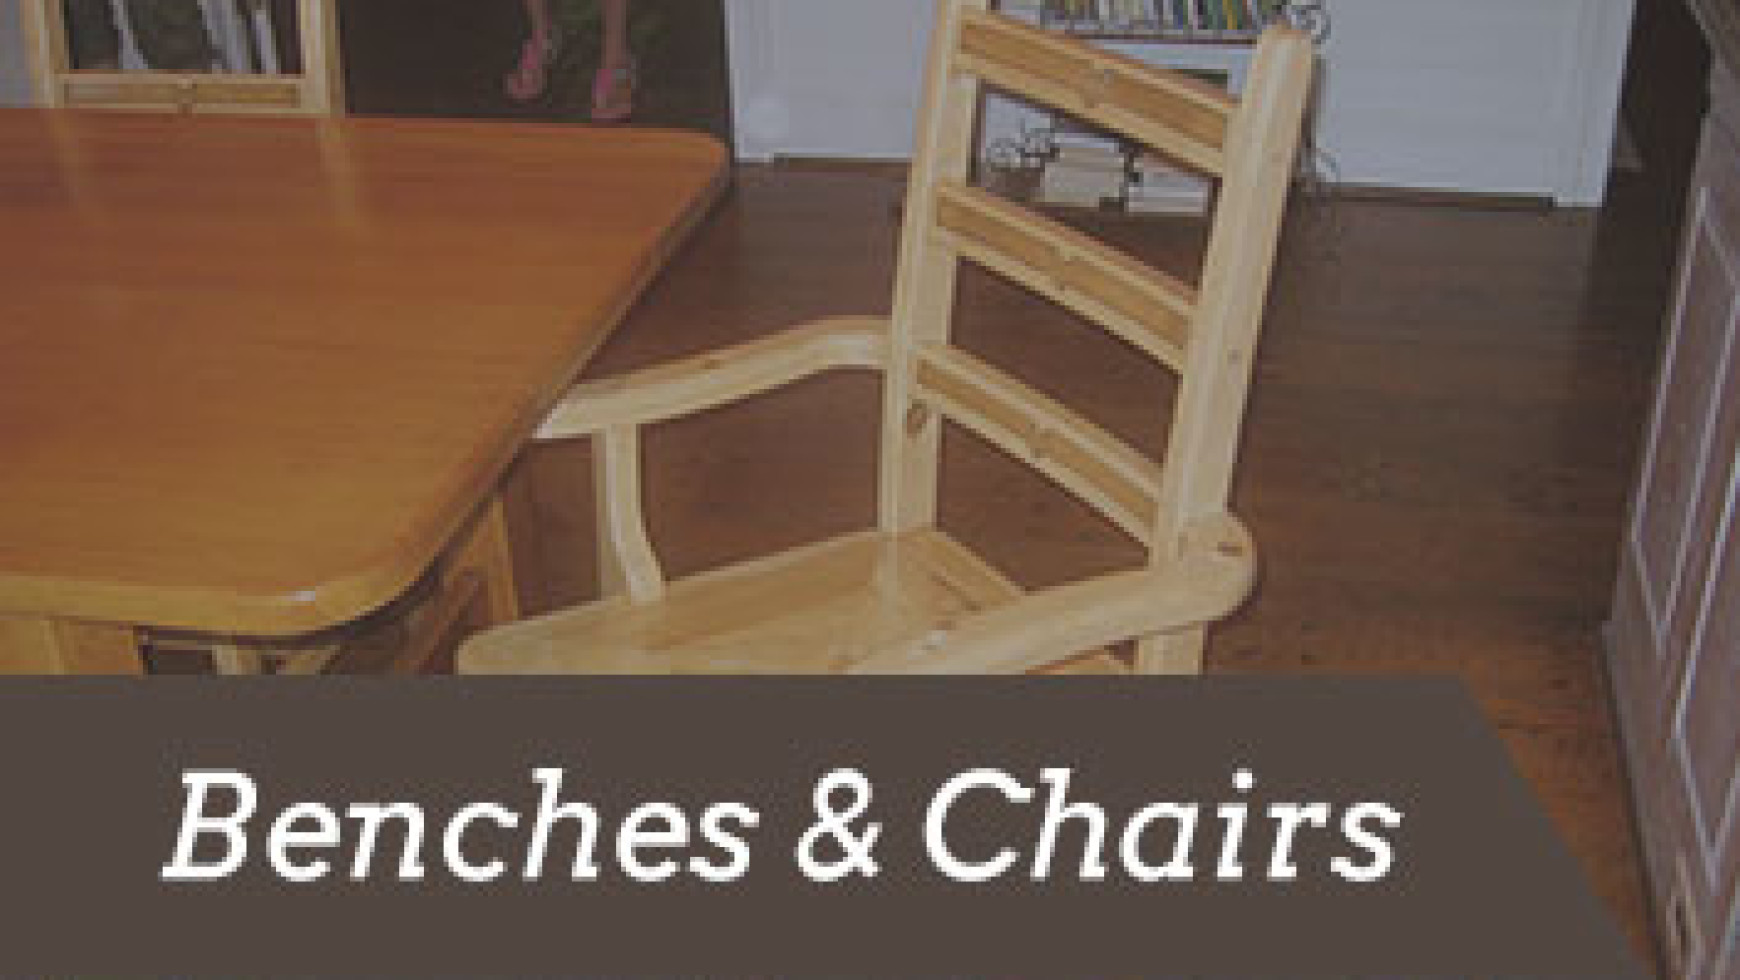 Benches & Chairs